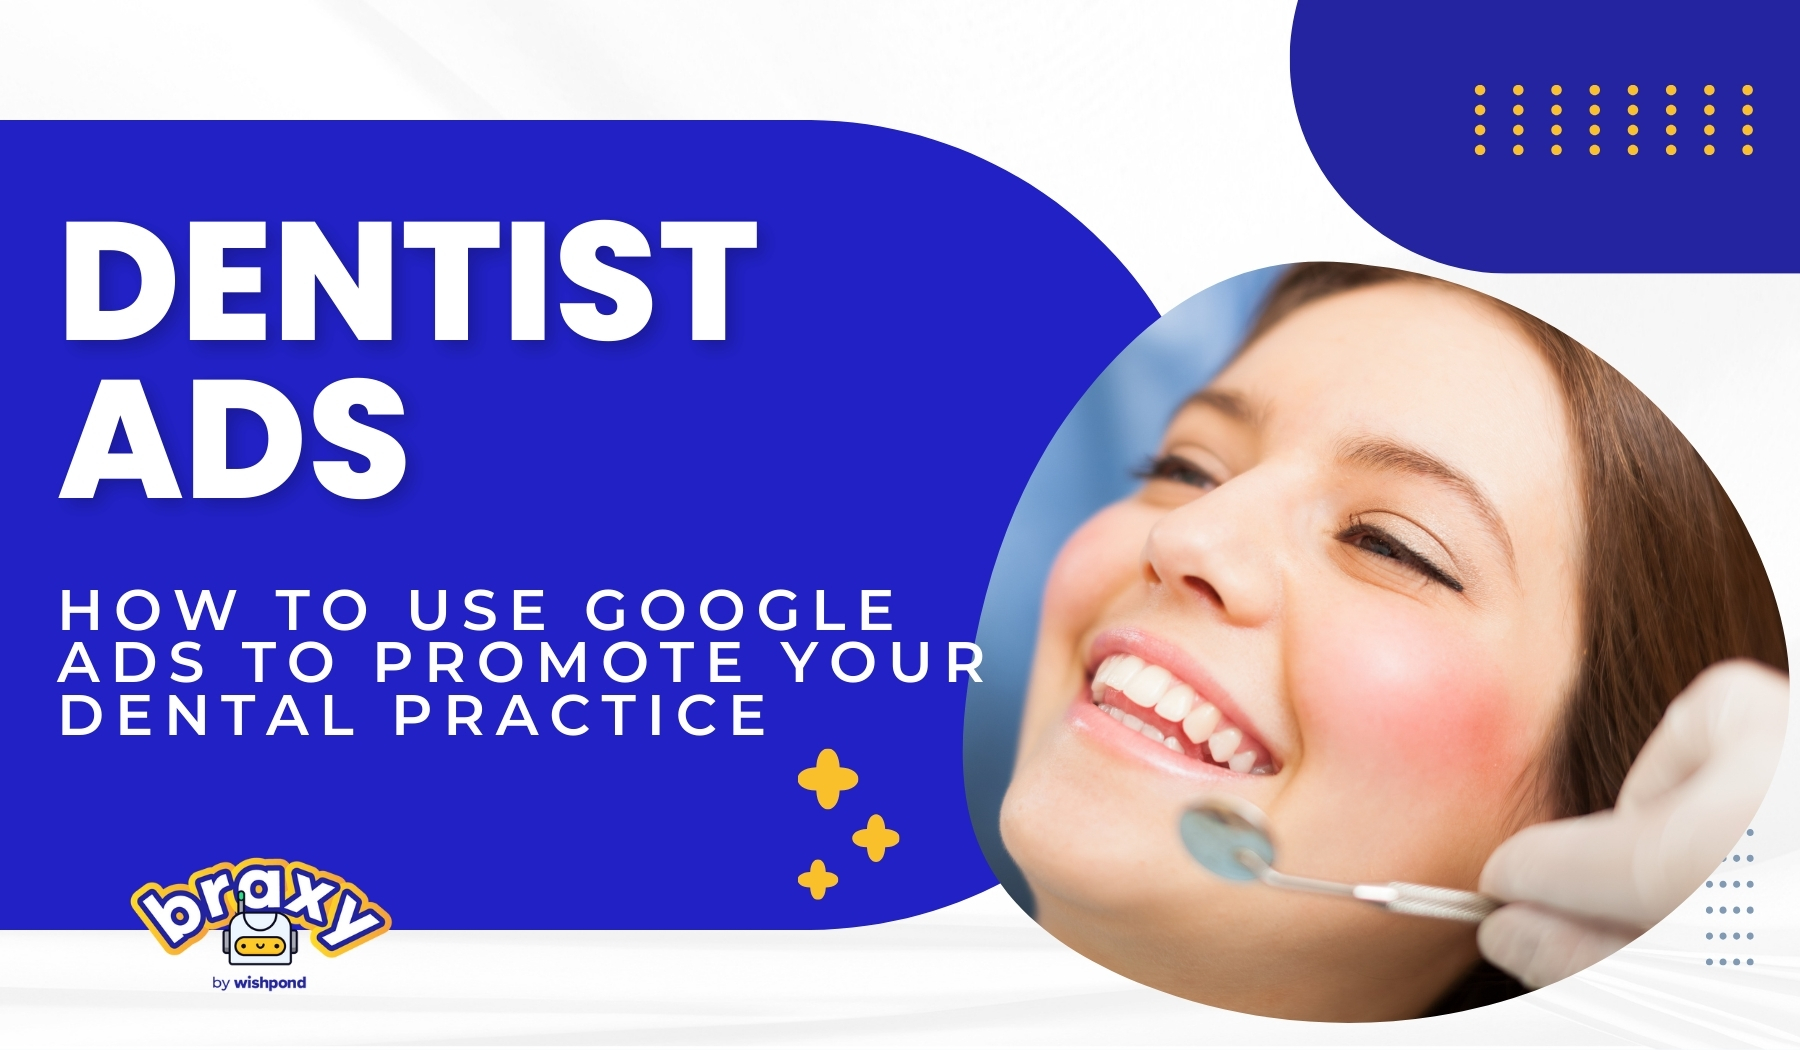 Dentist Ads: How to Use Google Ads to Promote Your Dental Practice